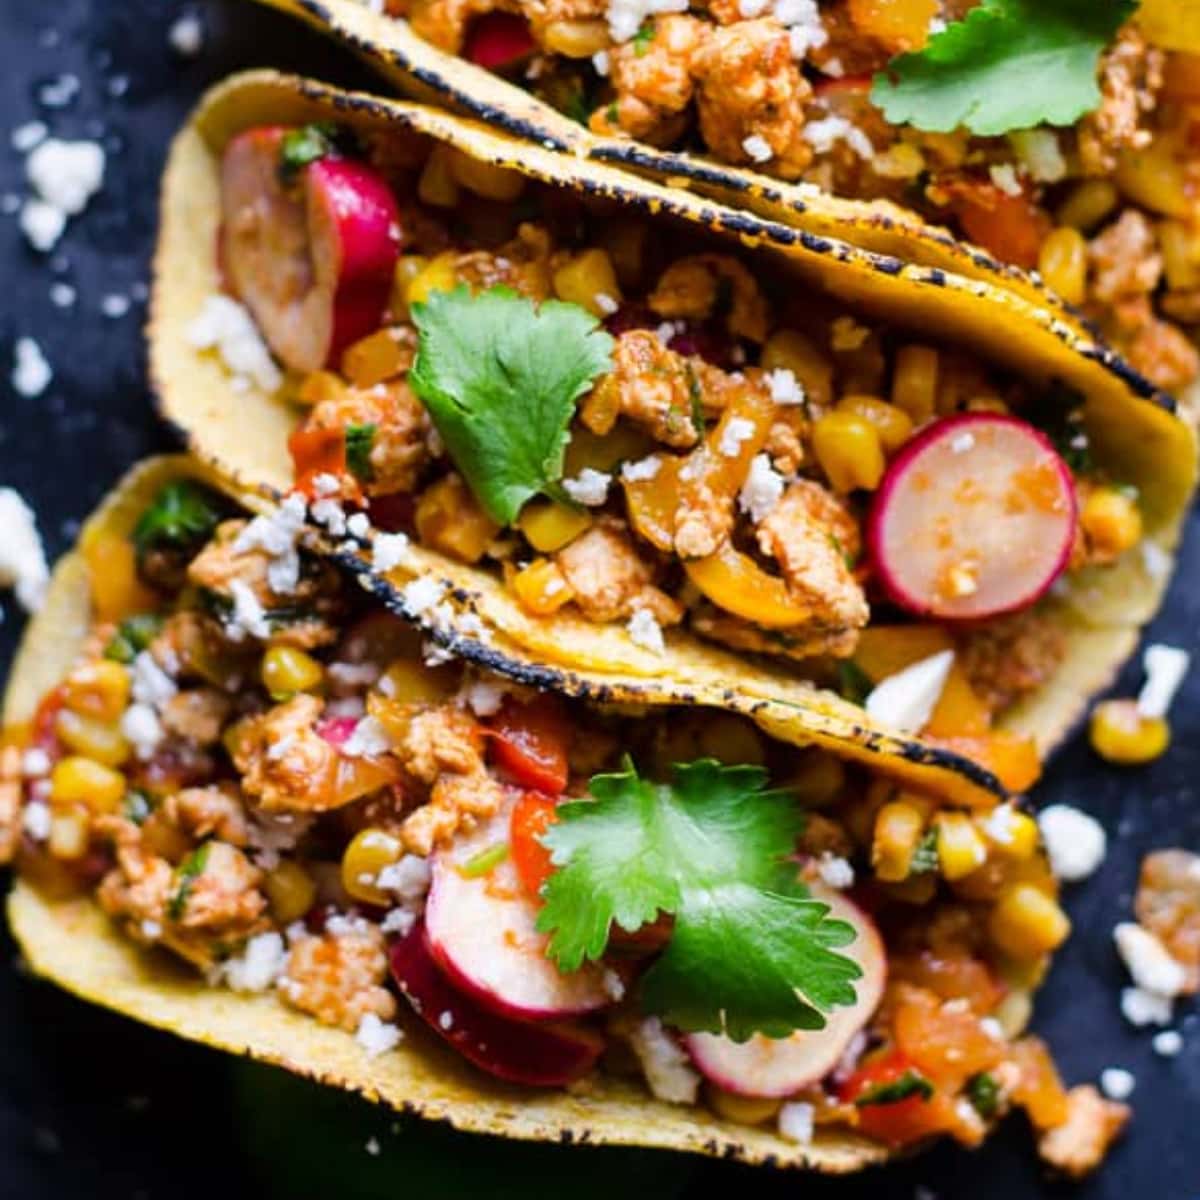 Tacos with chicken and radishes